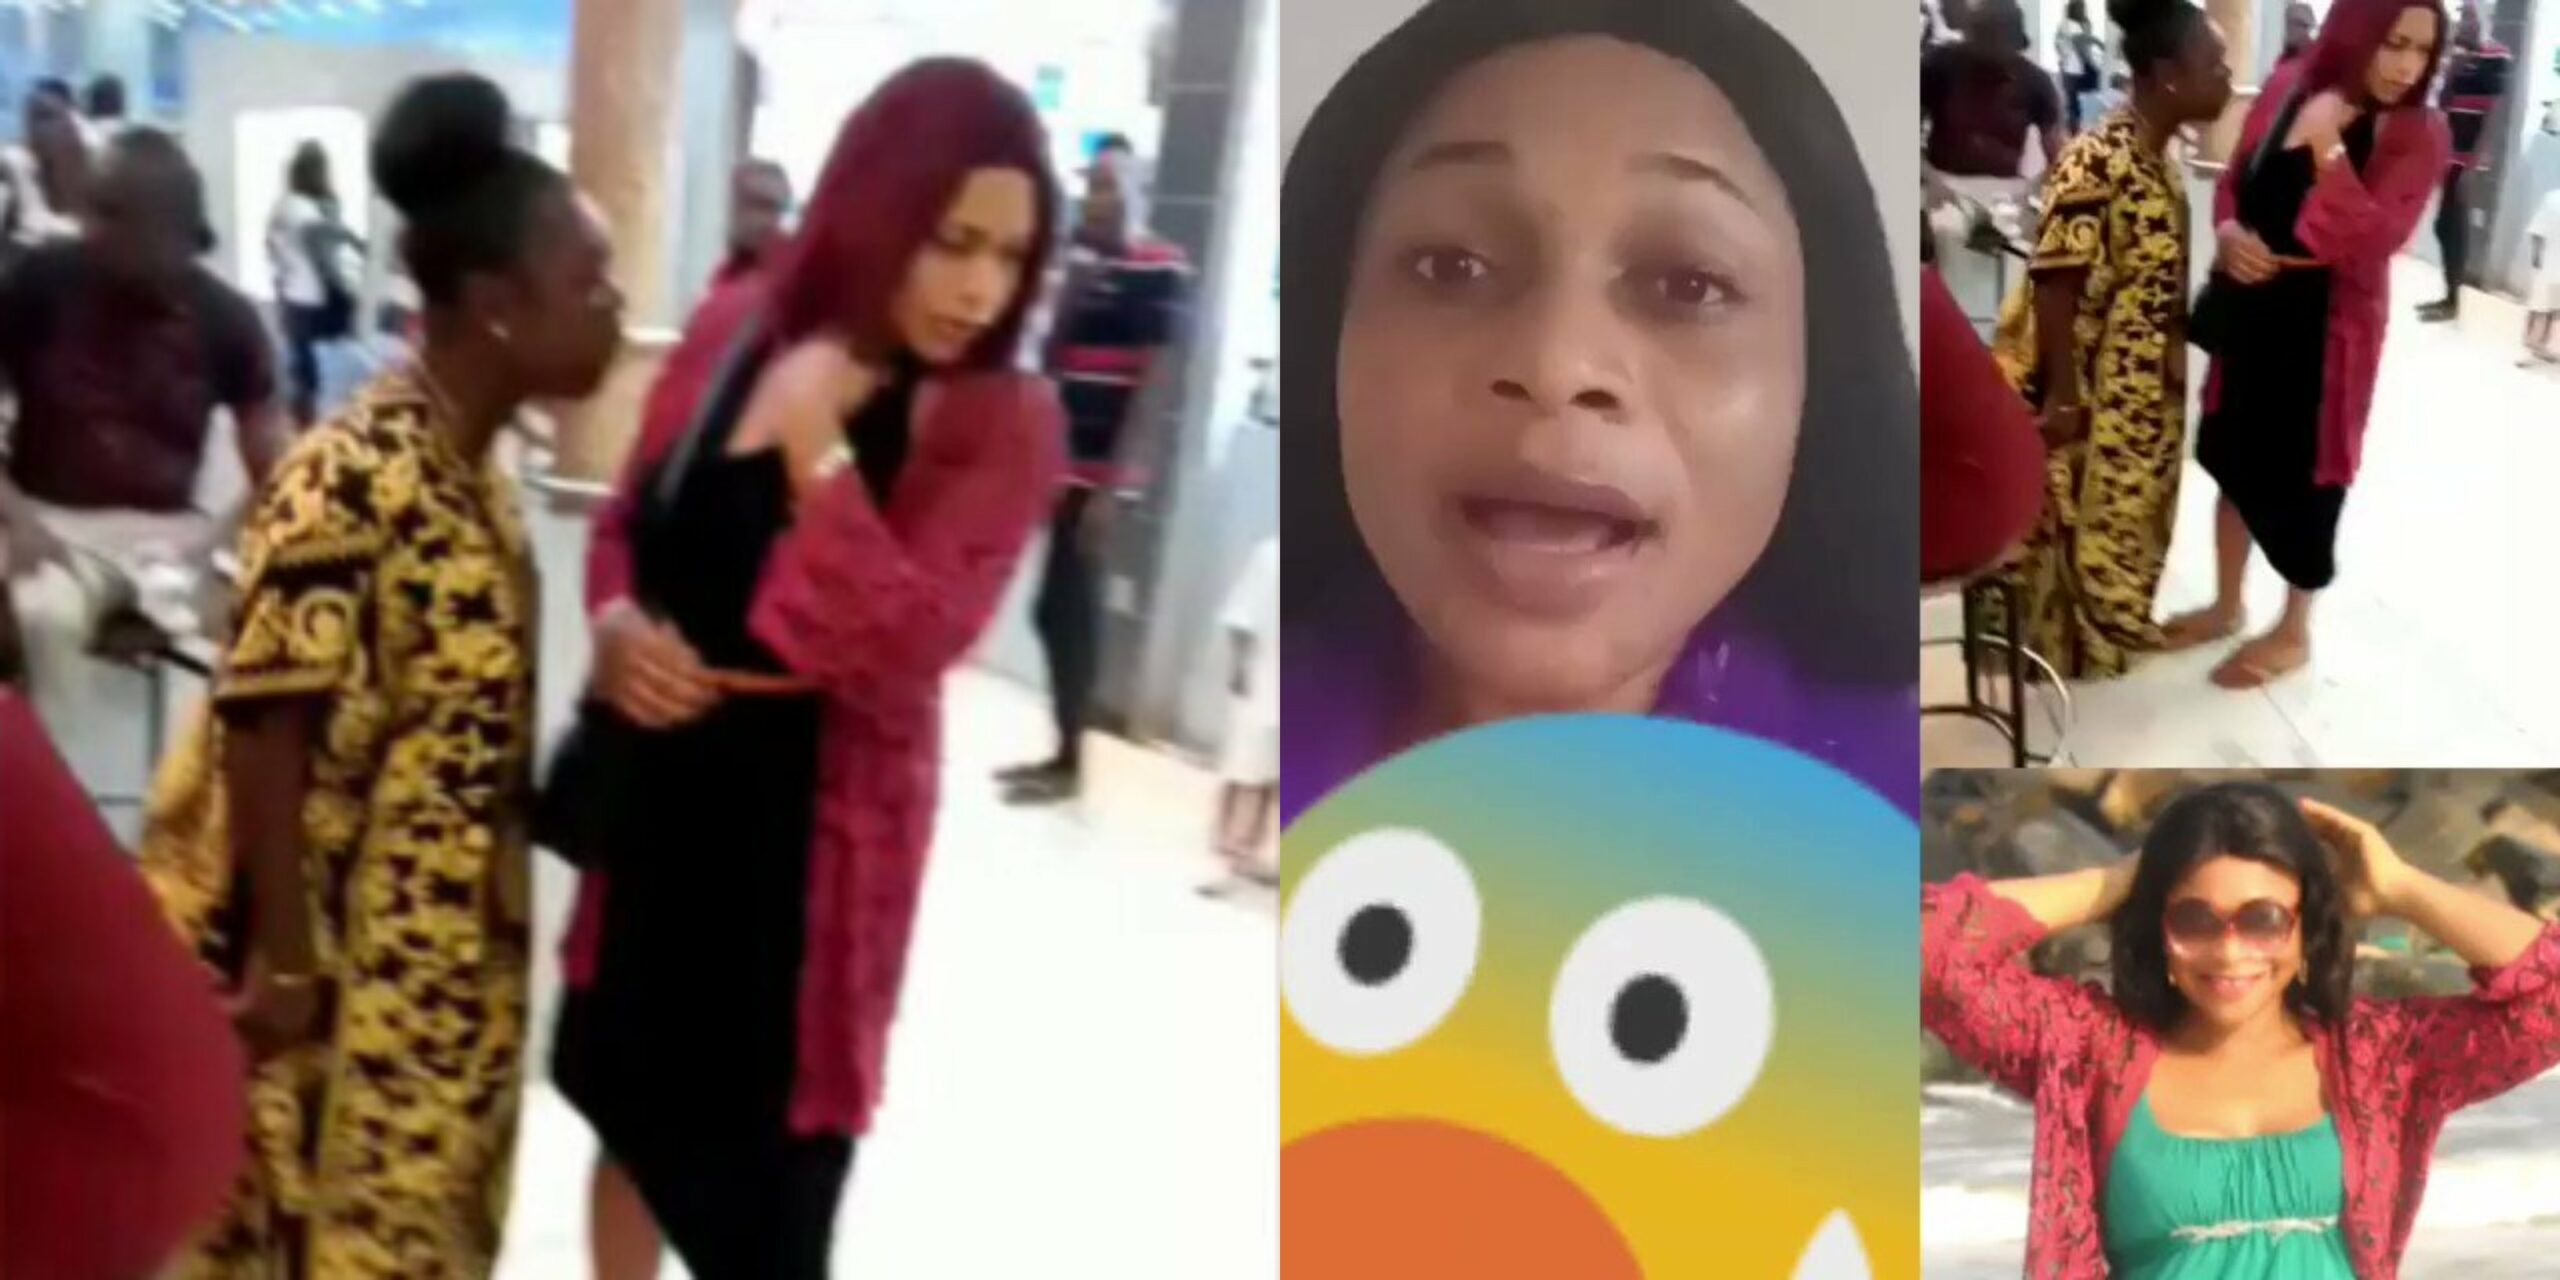 Lady beaten by married woman at Ikeja mall spotted in a video teaching women how to give their men BJ (Video)